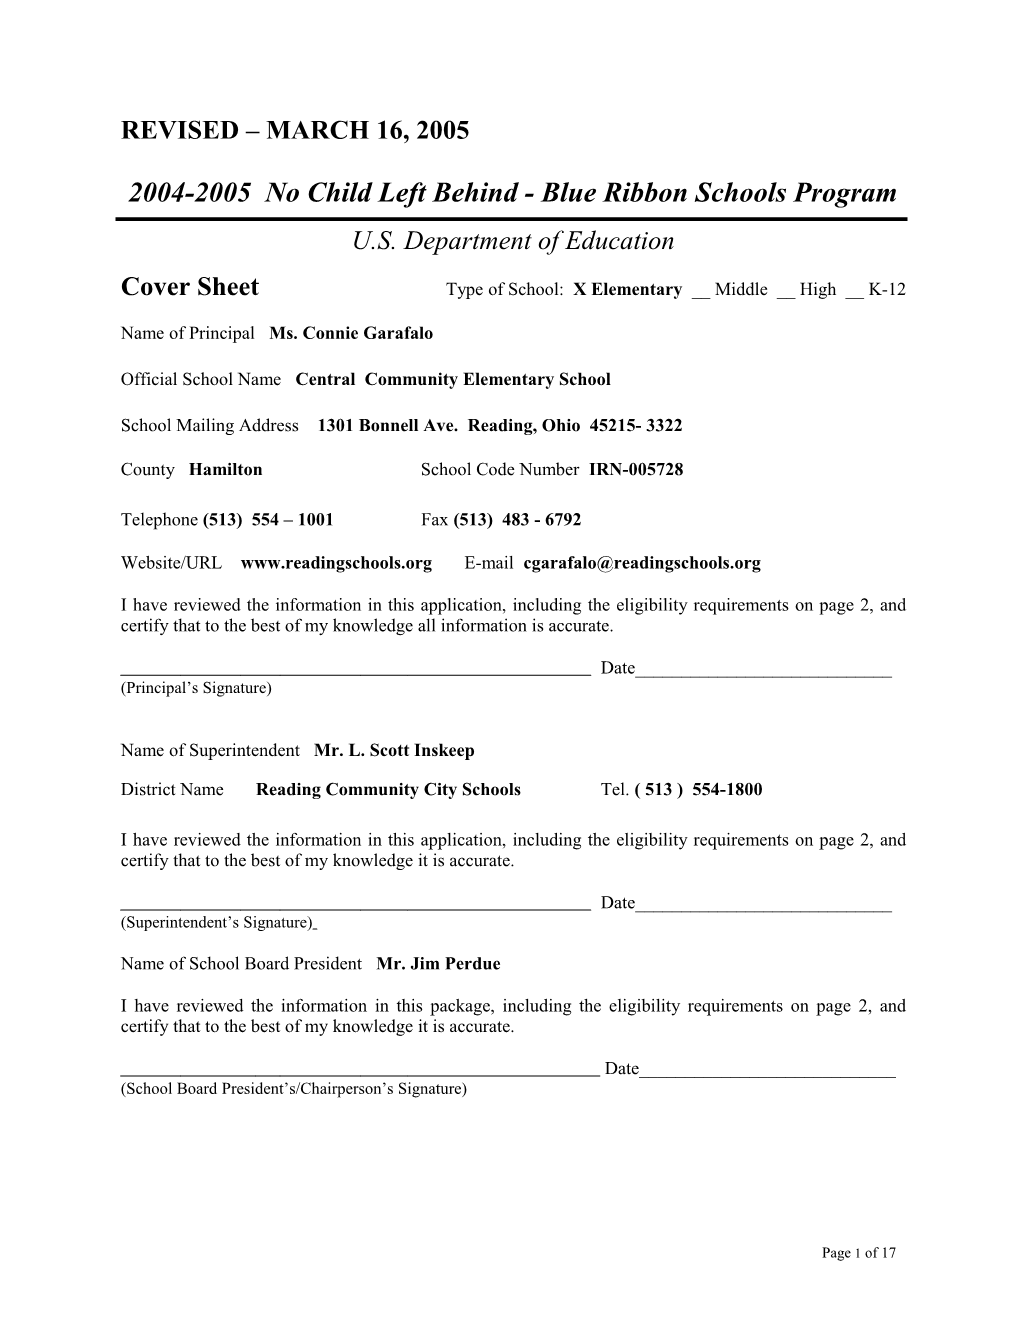 Central Community Elementary School Application: 2004-2005, No Child Left Behind - Blue